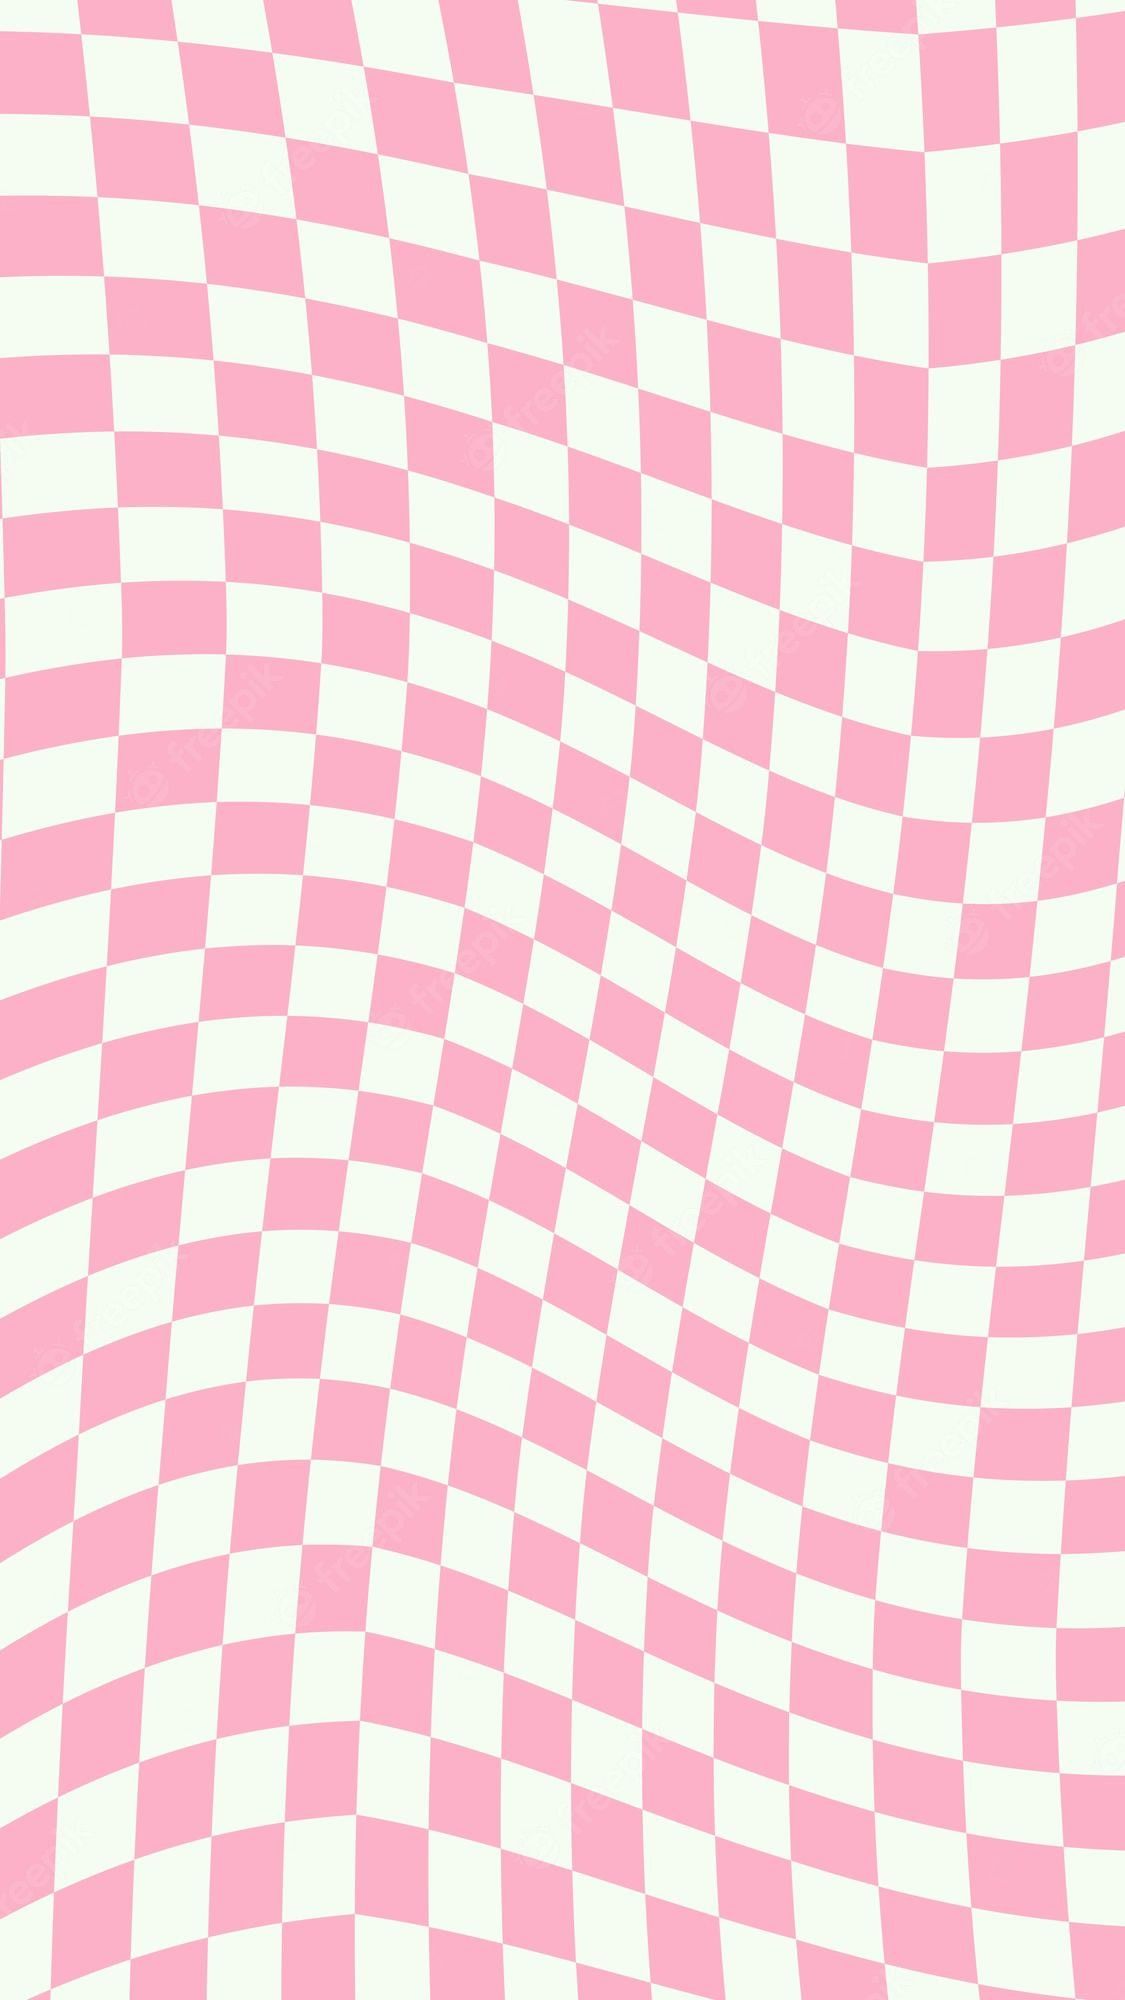 Premium Vector. Aesthetic cute distorted vertical pastel pink and white checkerboard gingham plaid checkers wallpaper illustration perfect for backdrop wallpaper postcard banner cover background